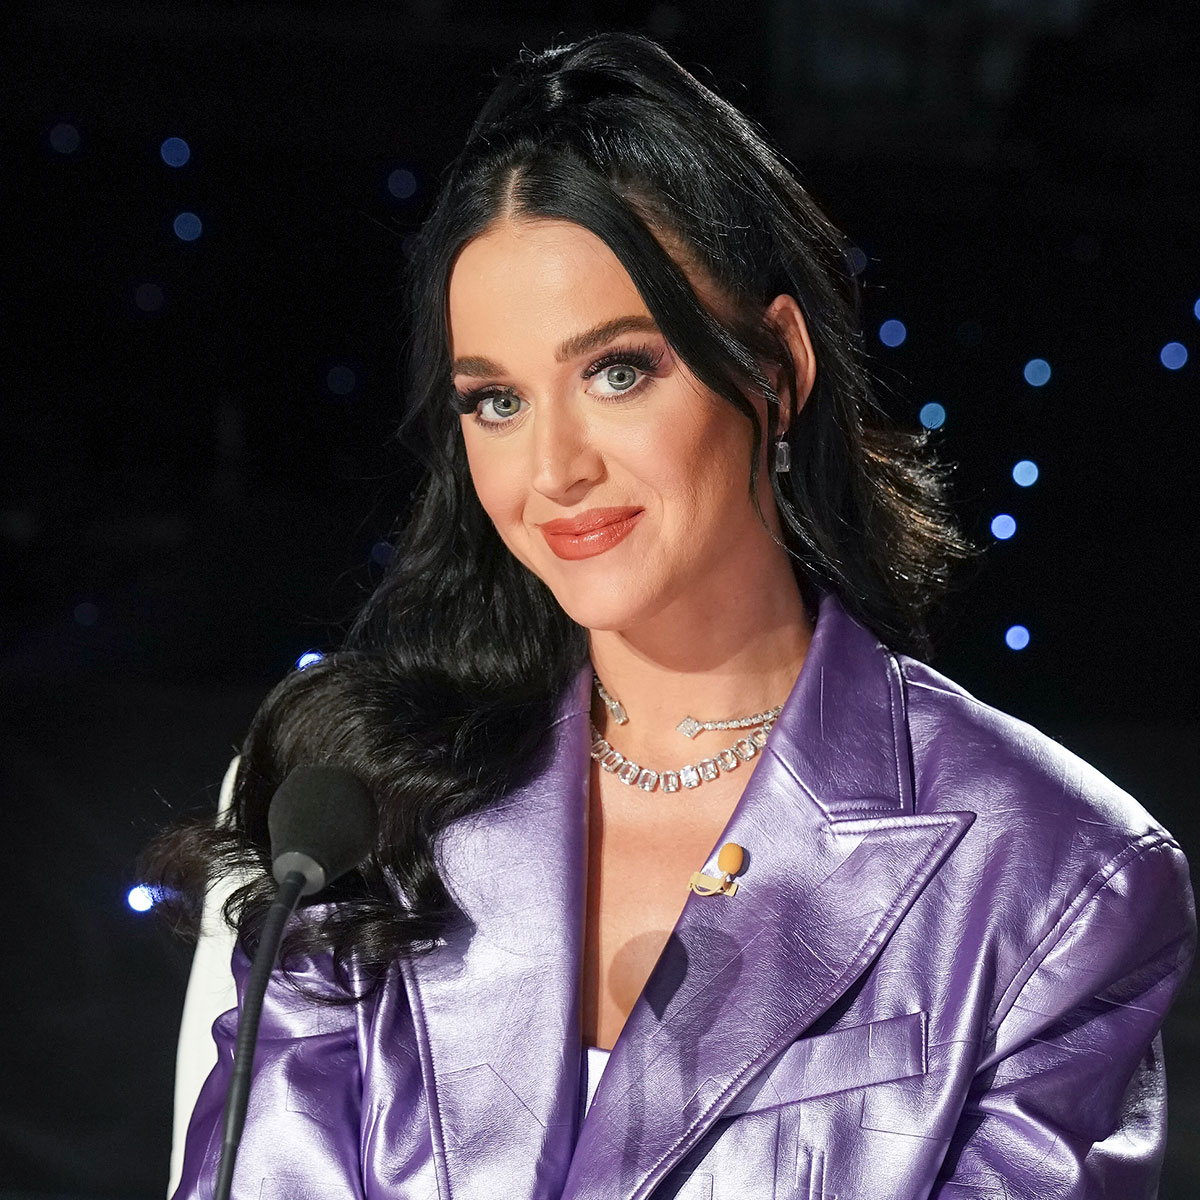 Katy Perry Looks Angelic In A Plunging White Two-Piece Set For An Episode Of 'American Idol' - SHEfinds